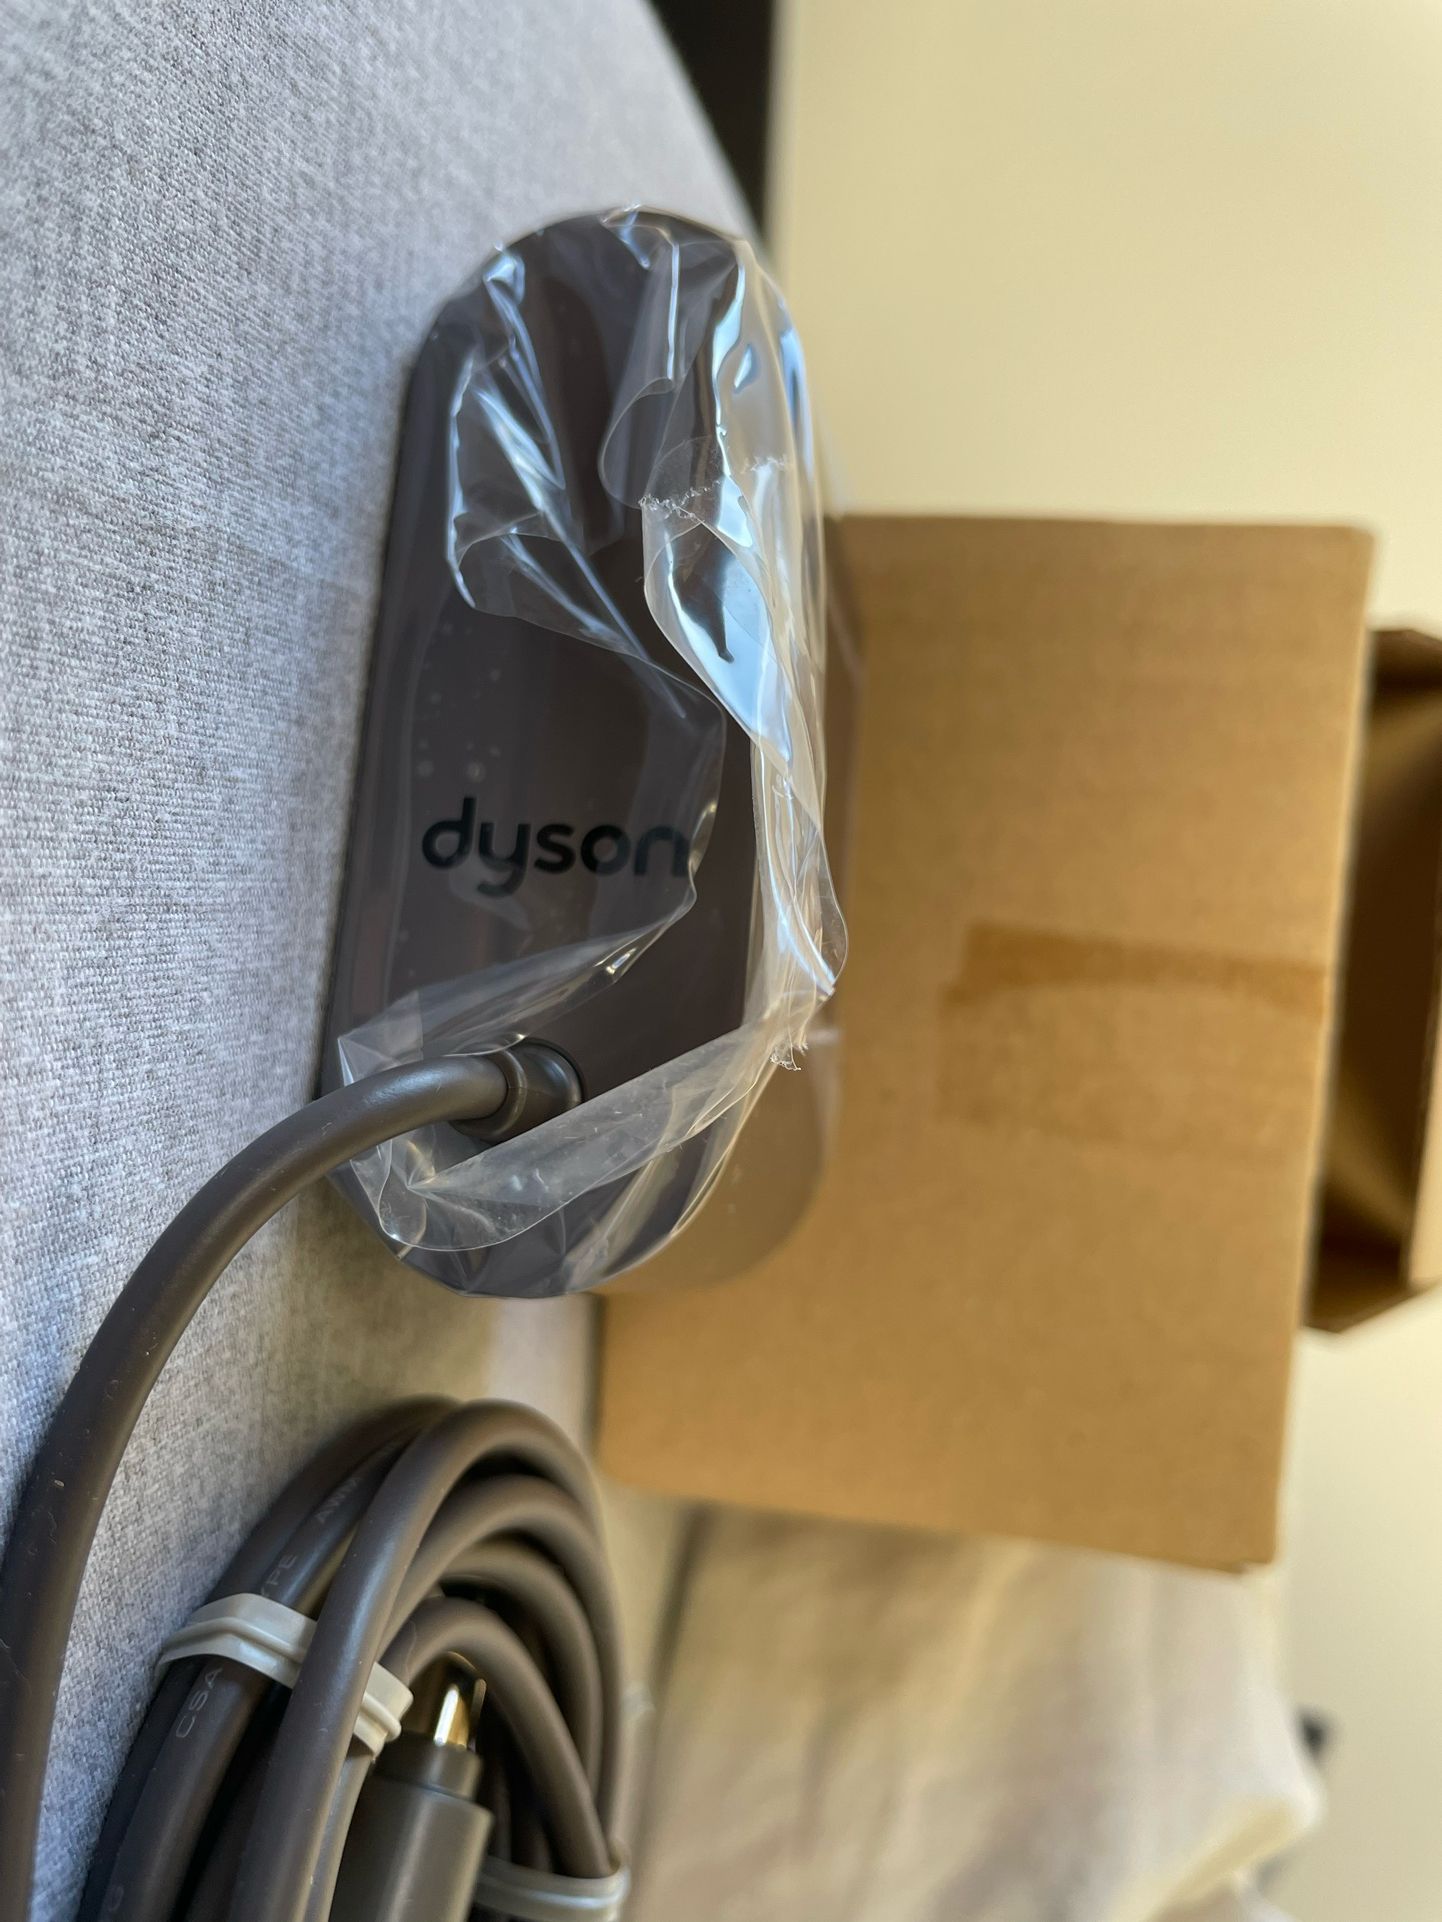 Dyson Vac Charger (Brand new)